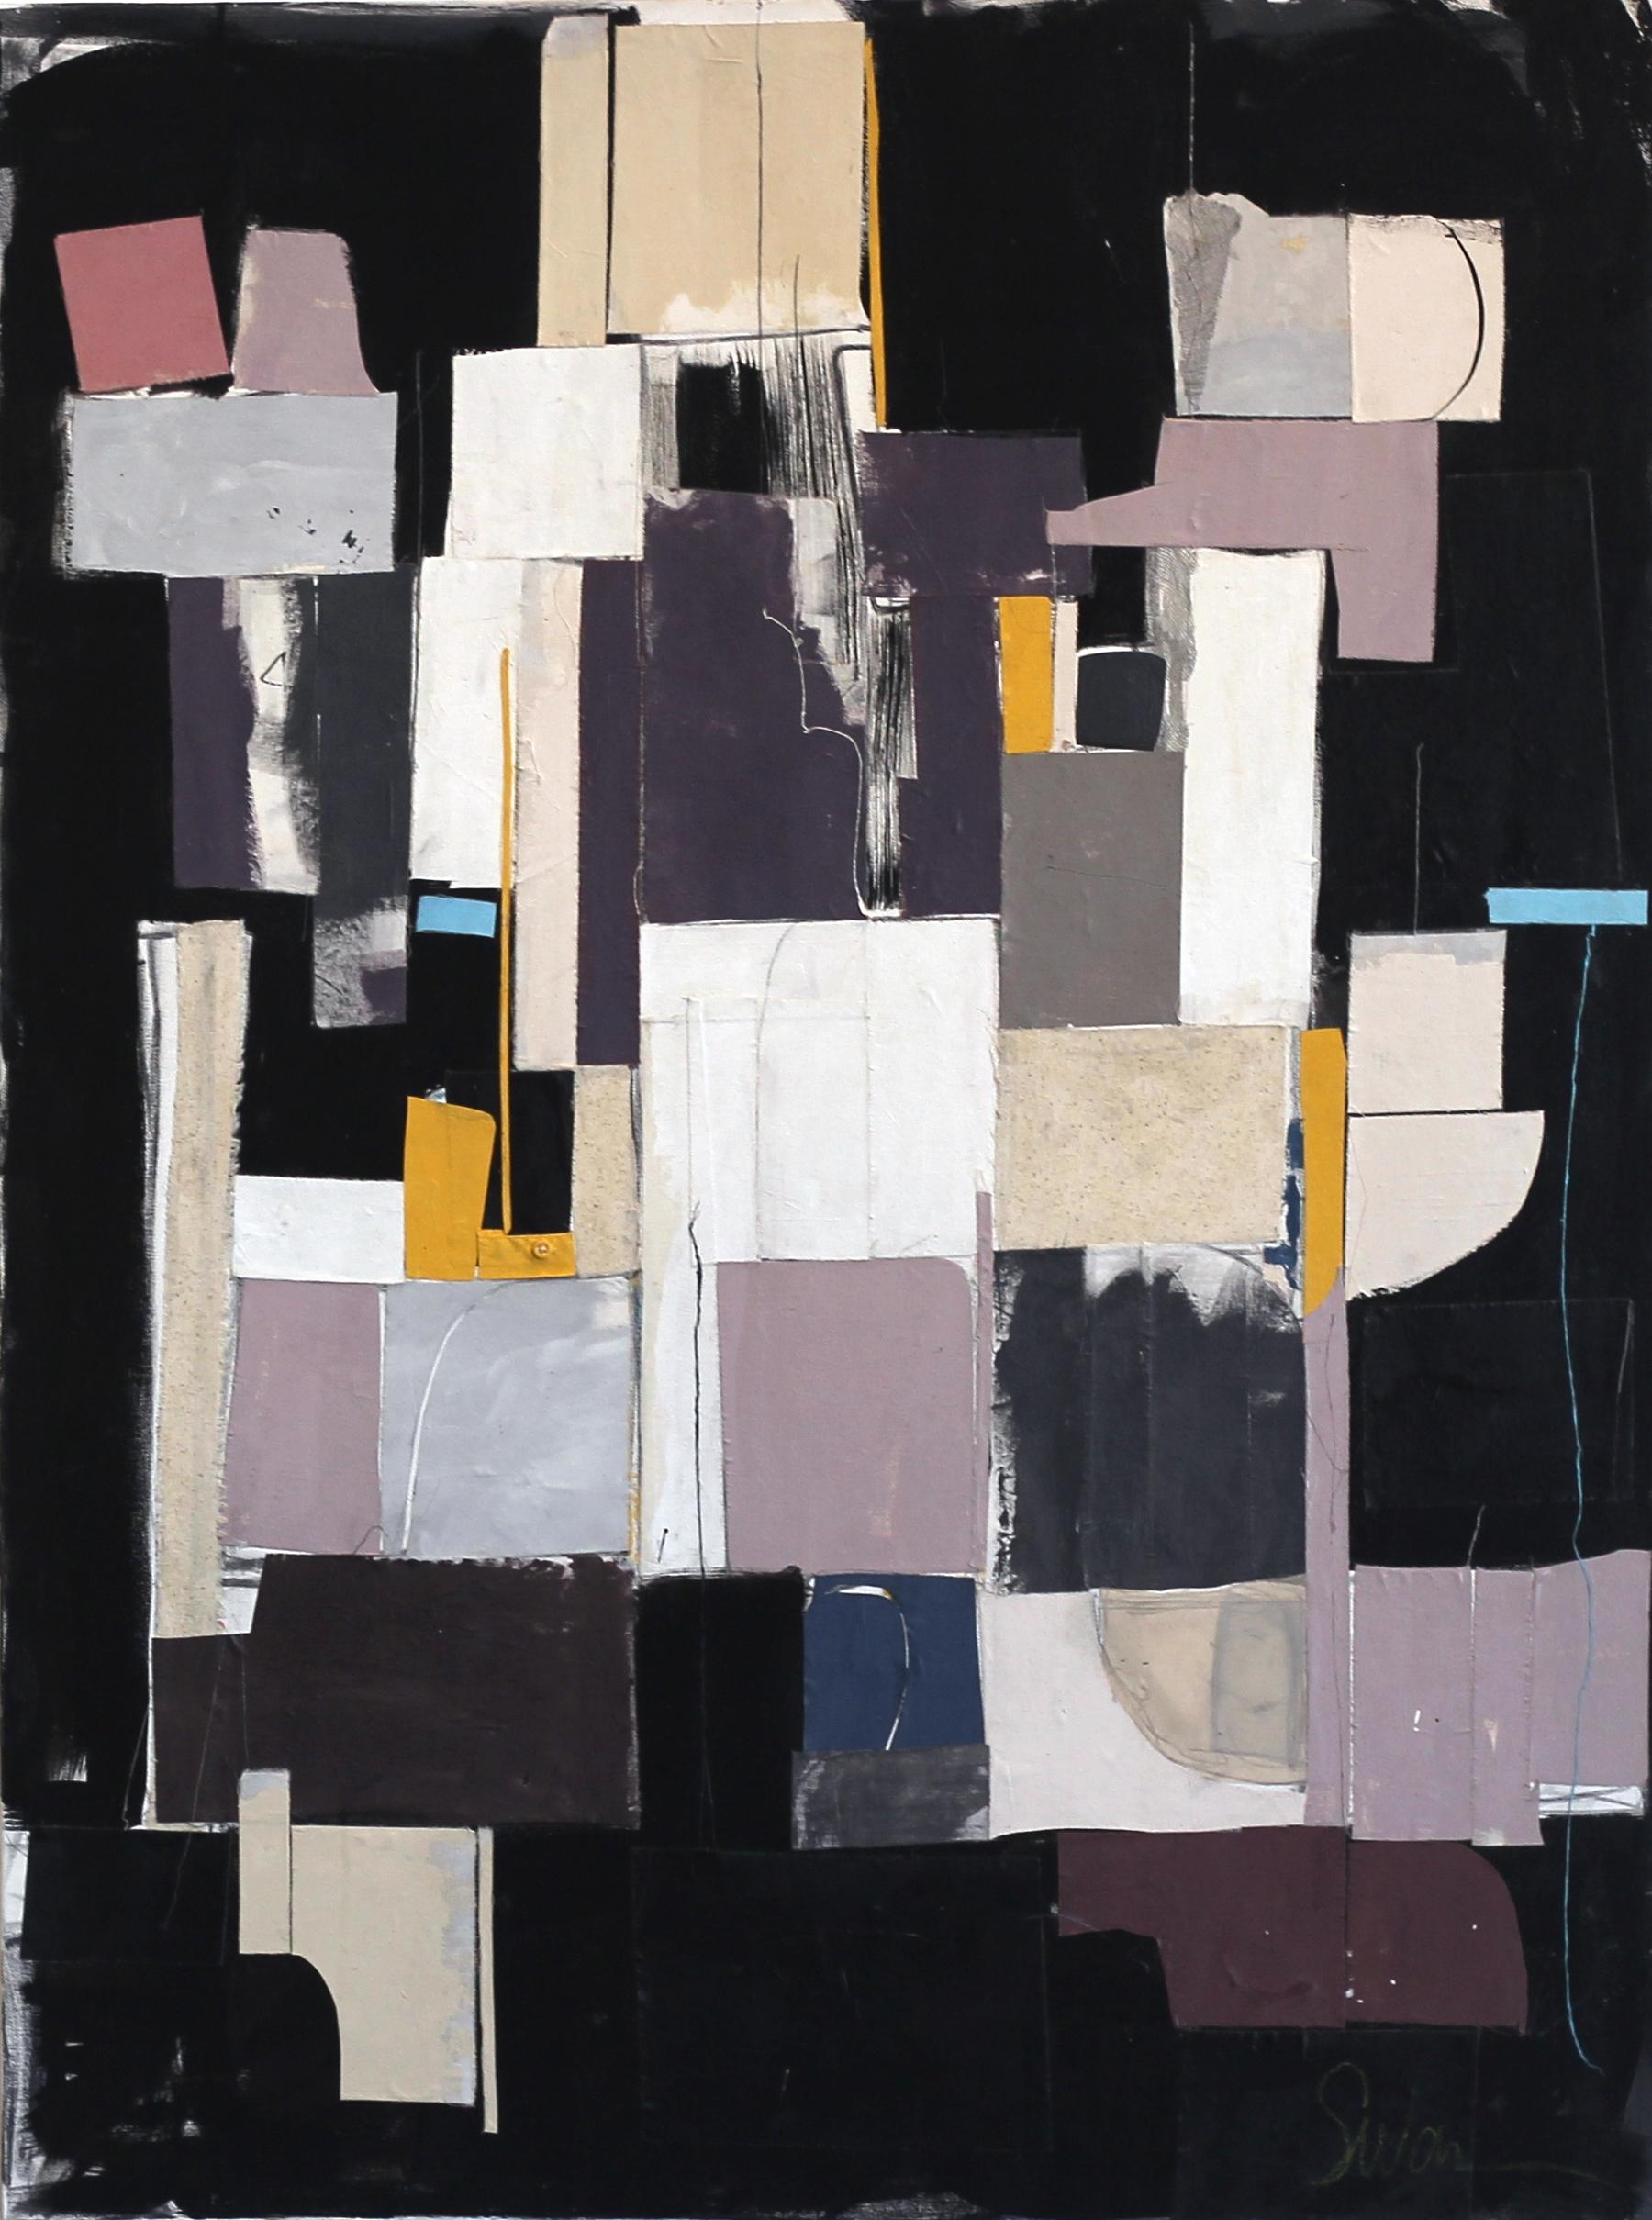 Susan Washington incorporates textile, thread, and vintage pattern paper into her painted mixed-media, abstract collage works, producing surfaces layered with textures, rich colors and expressive line work. Her influences include the work of the